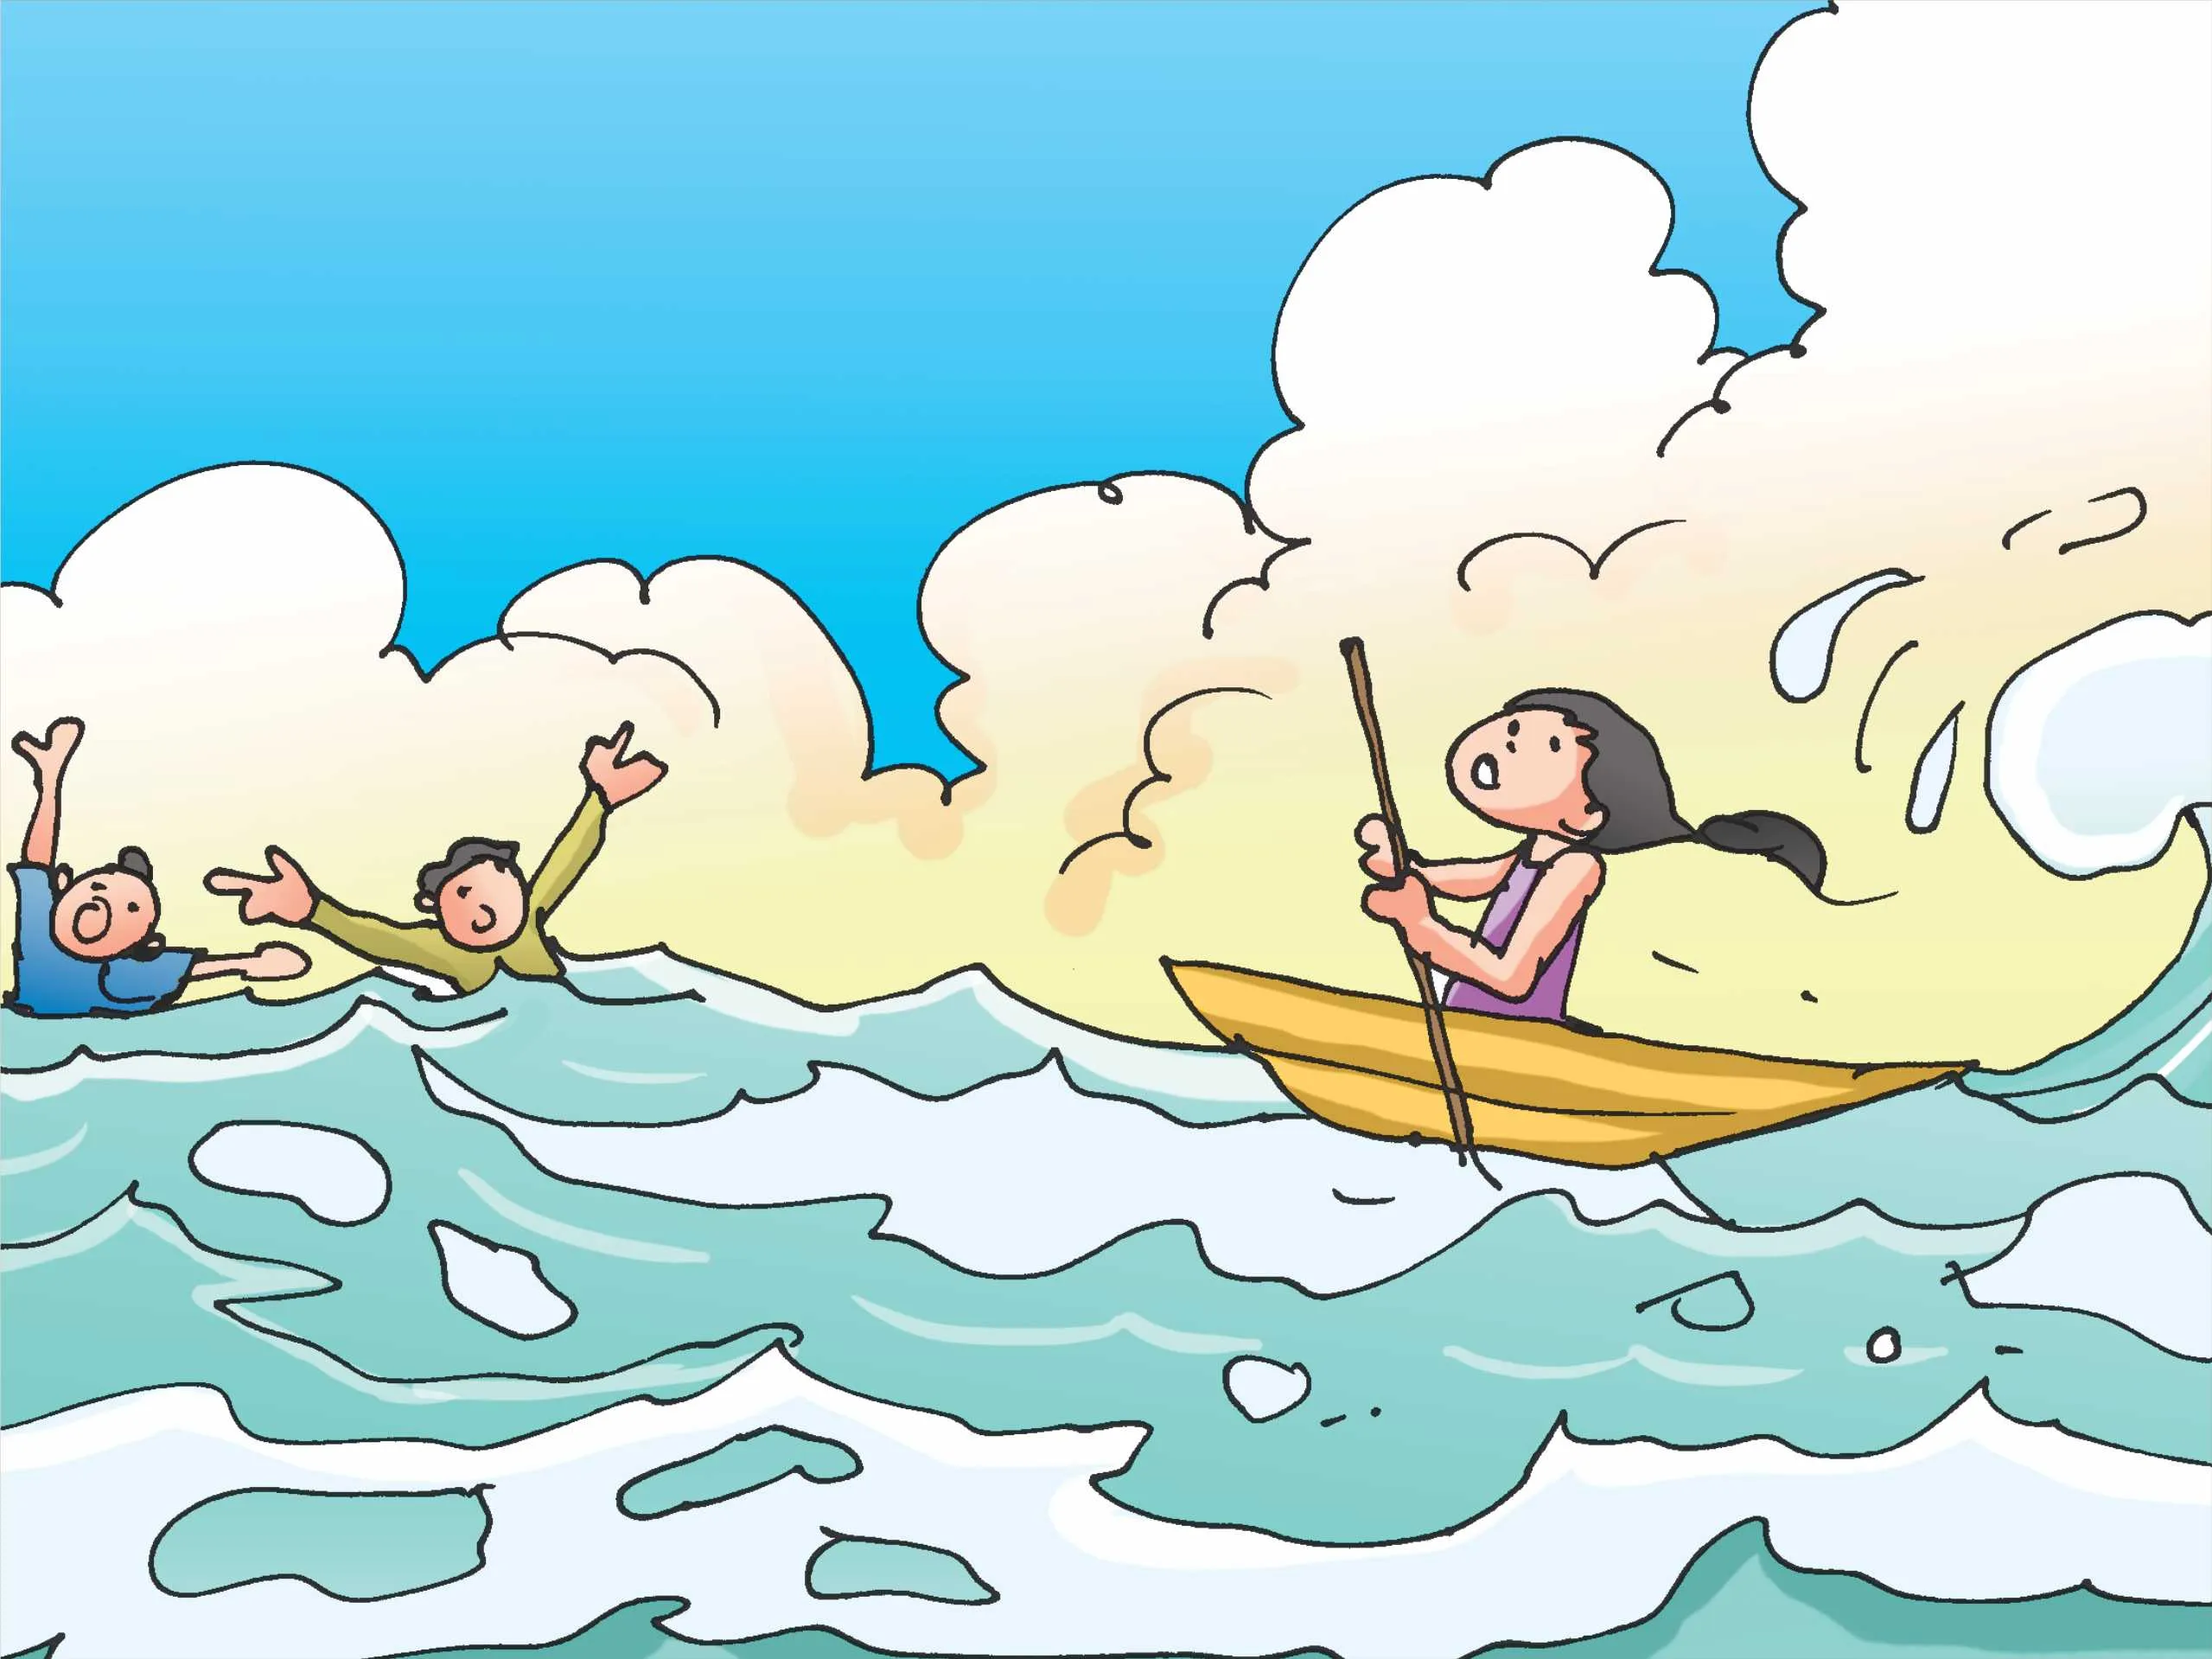 Little Girl Rowing A Boat In Sea During Bad Weather for saving lives cartoon image